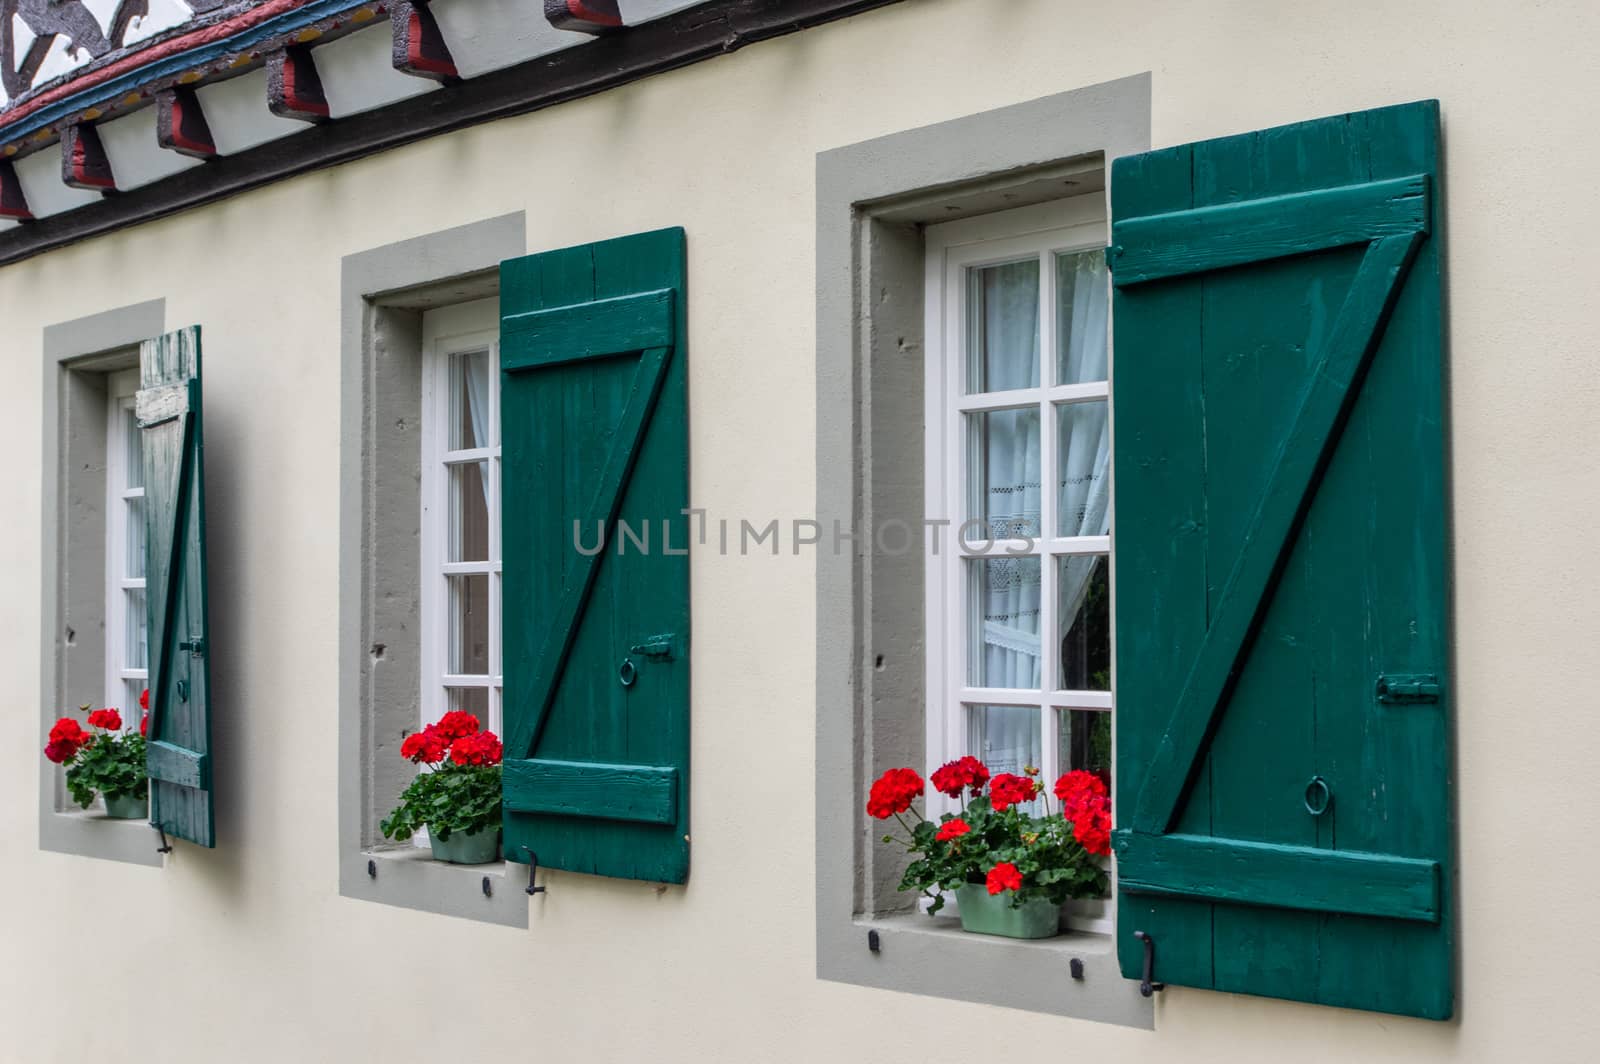 close-up of windows in the old town of Linz on the Rhine